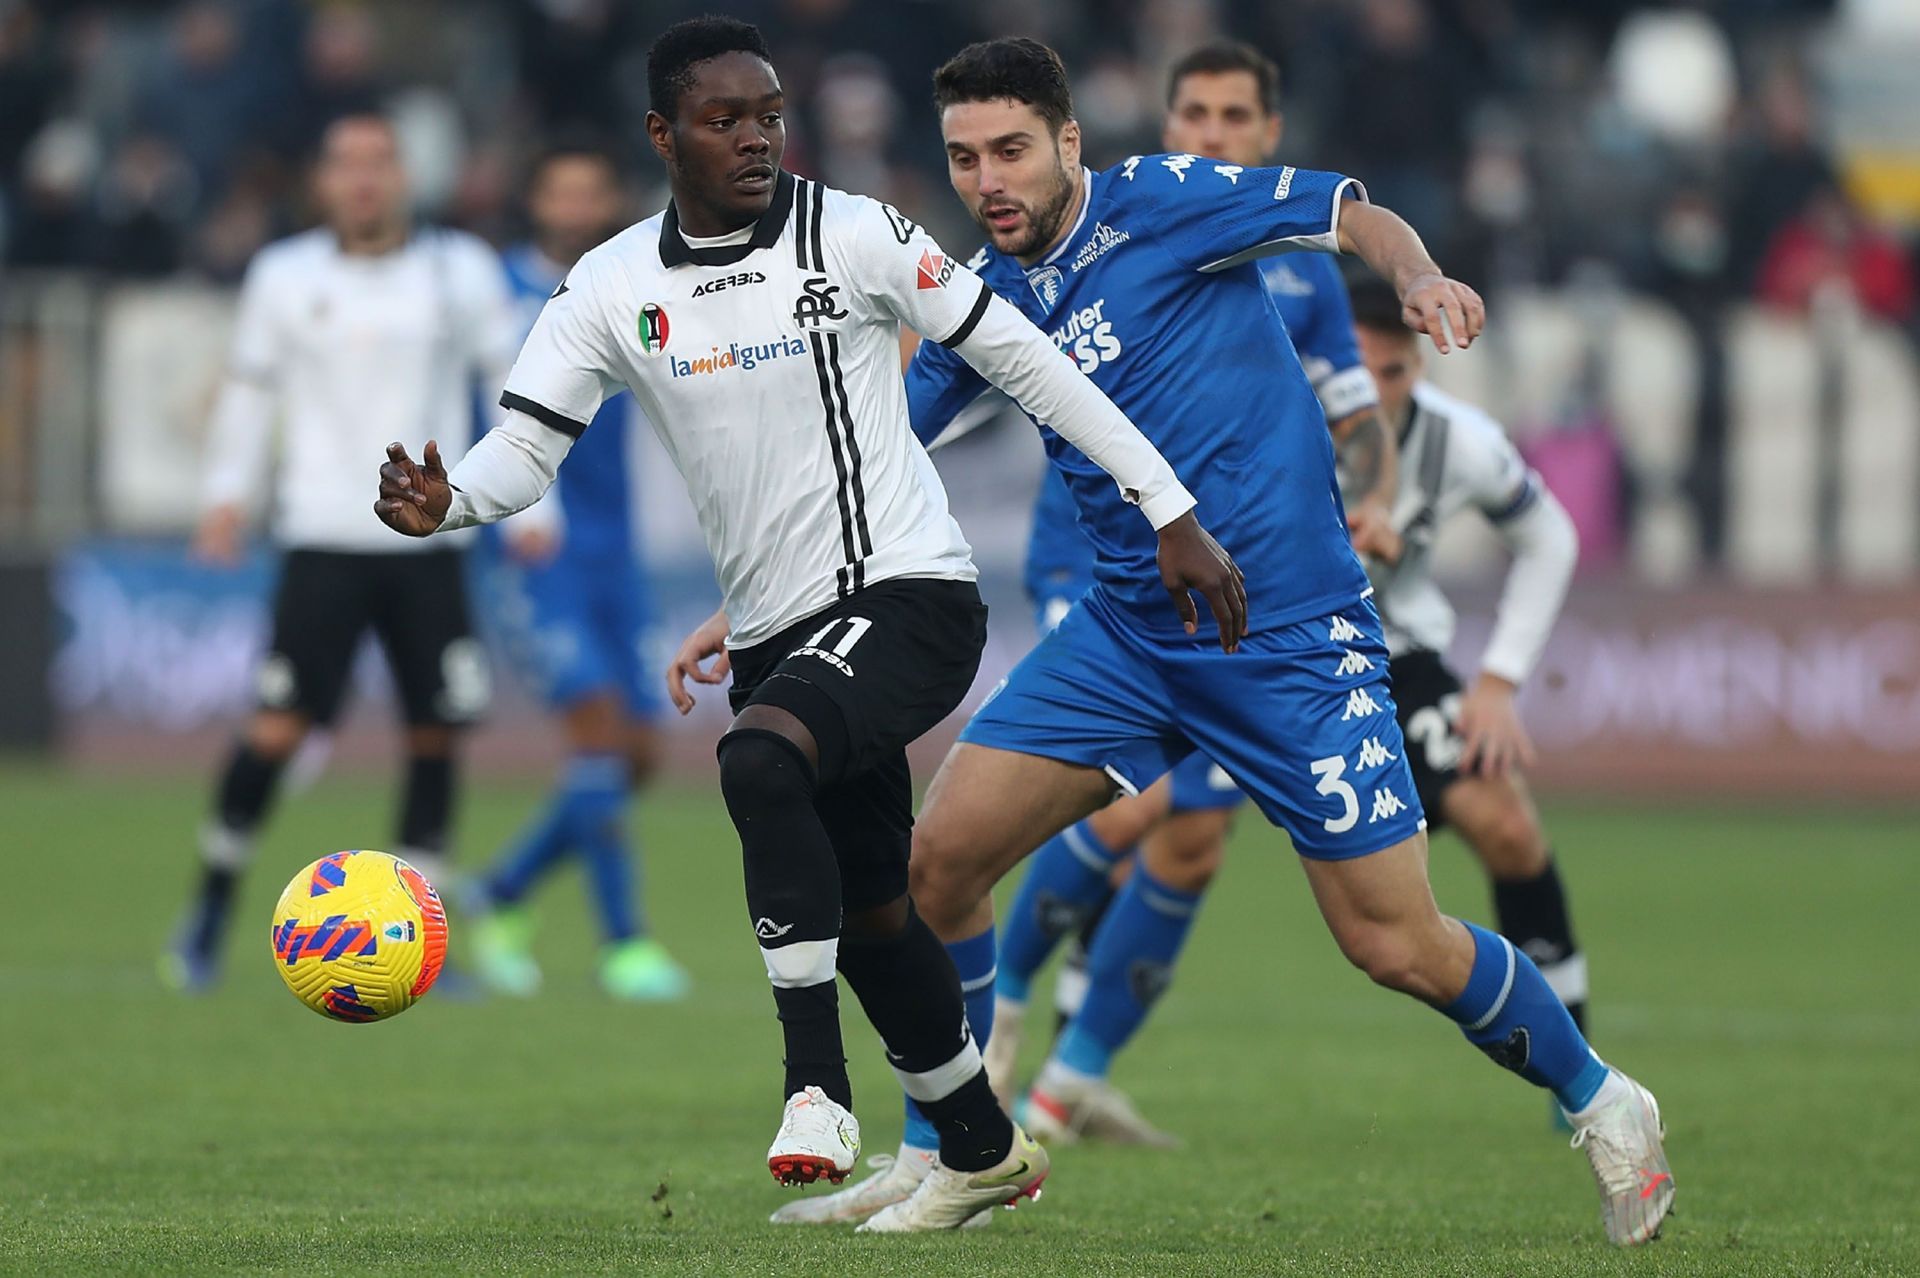 Empoli and Spezia square off in their Serie A fixture on Saturday